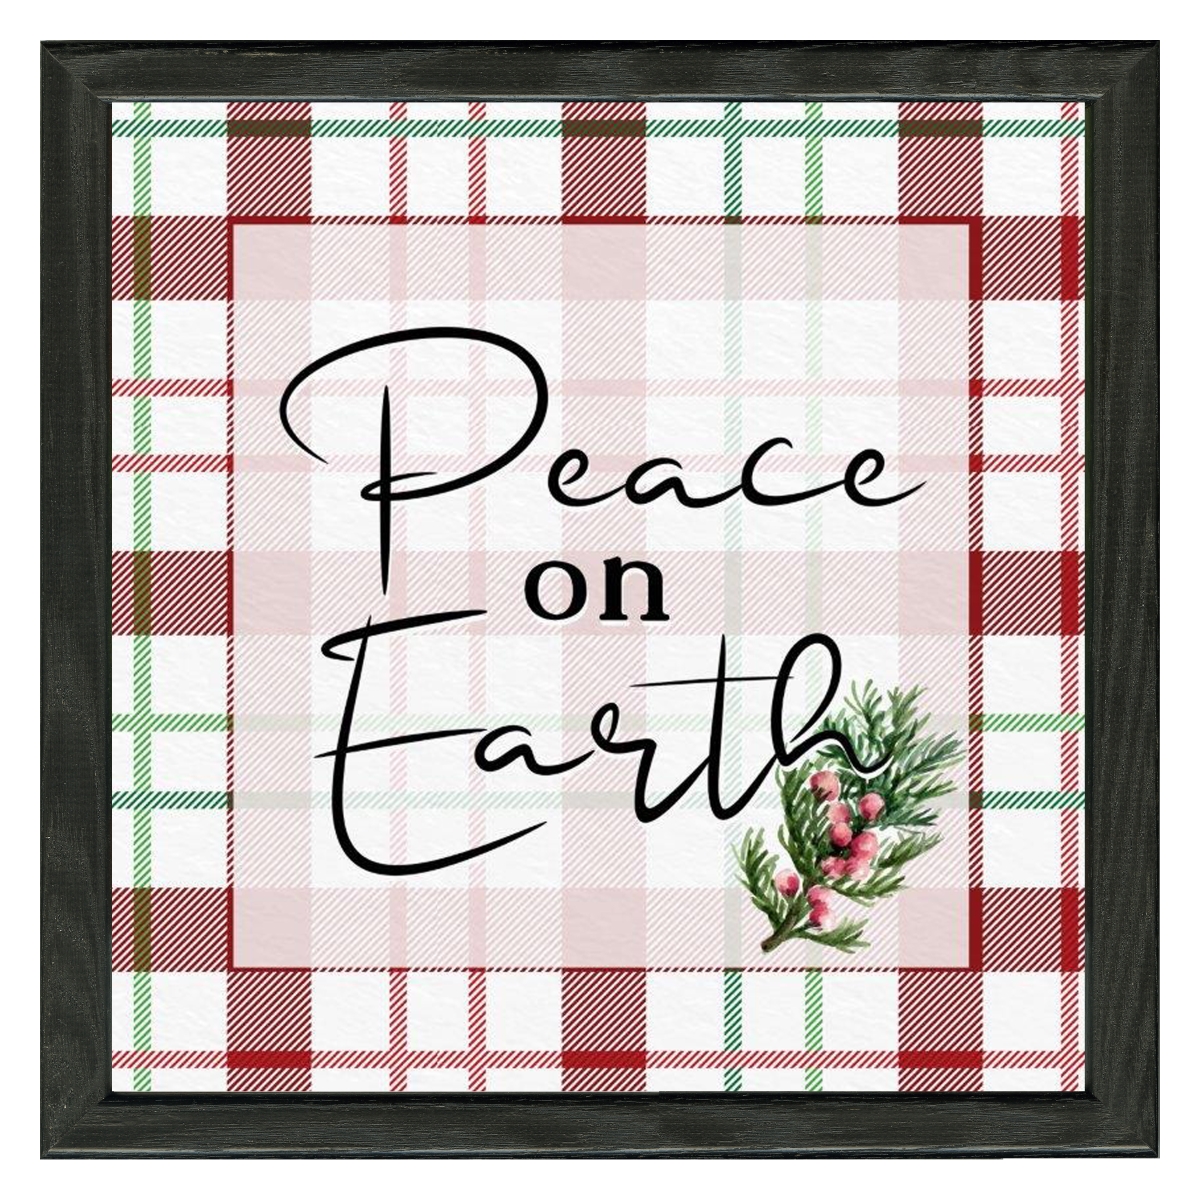 Timeless Frames 55419 10 x 10 in. Peace on Earth Wall Decor